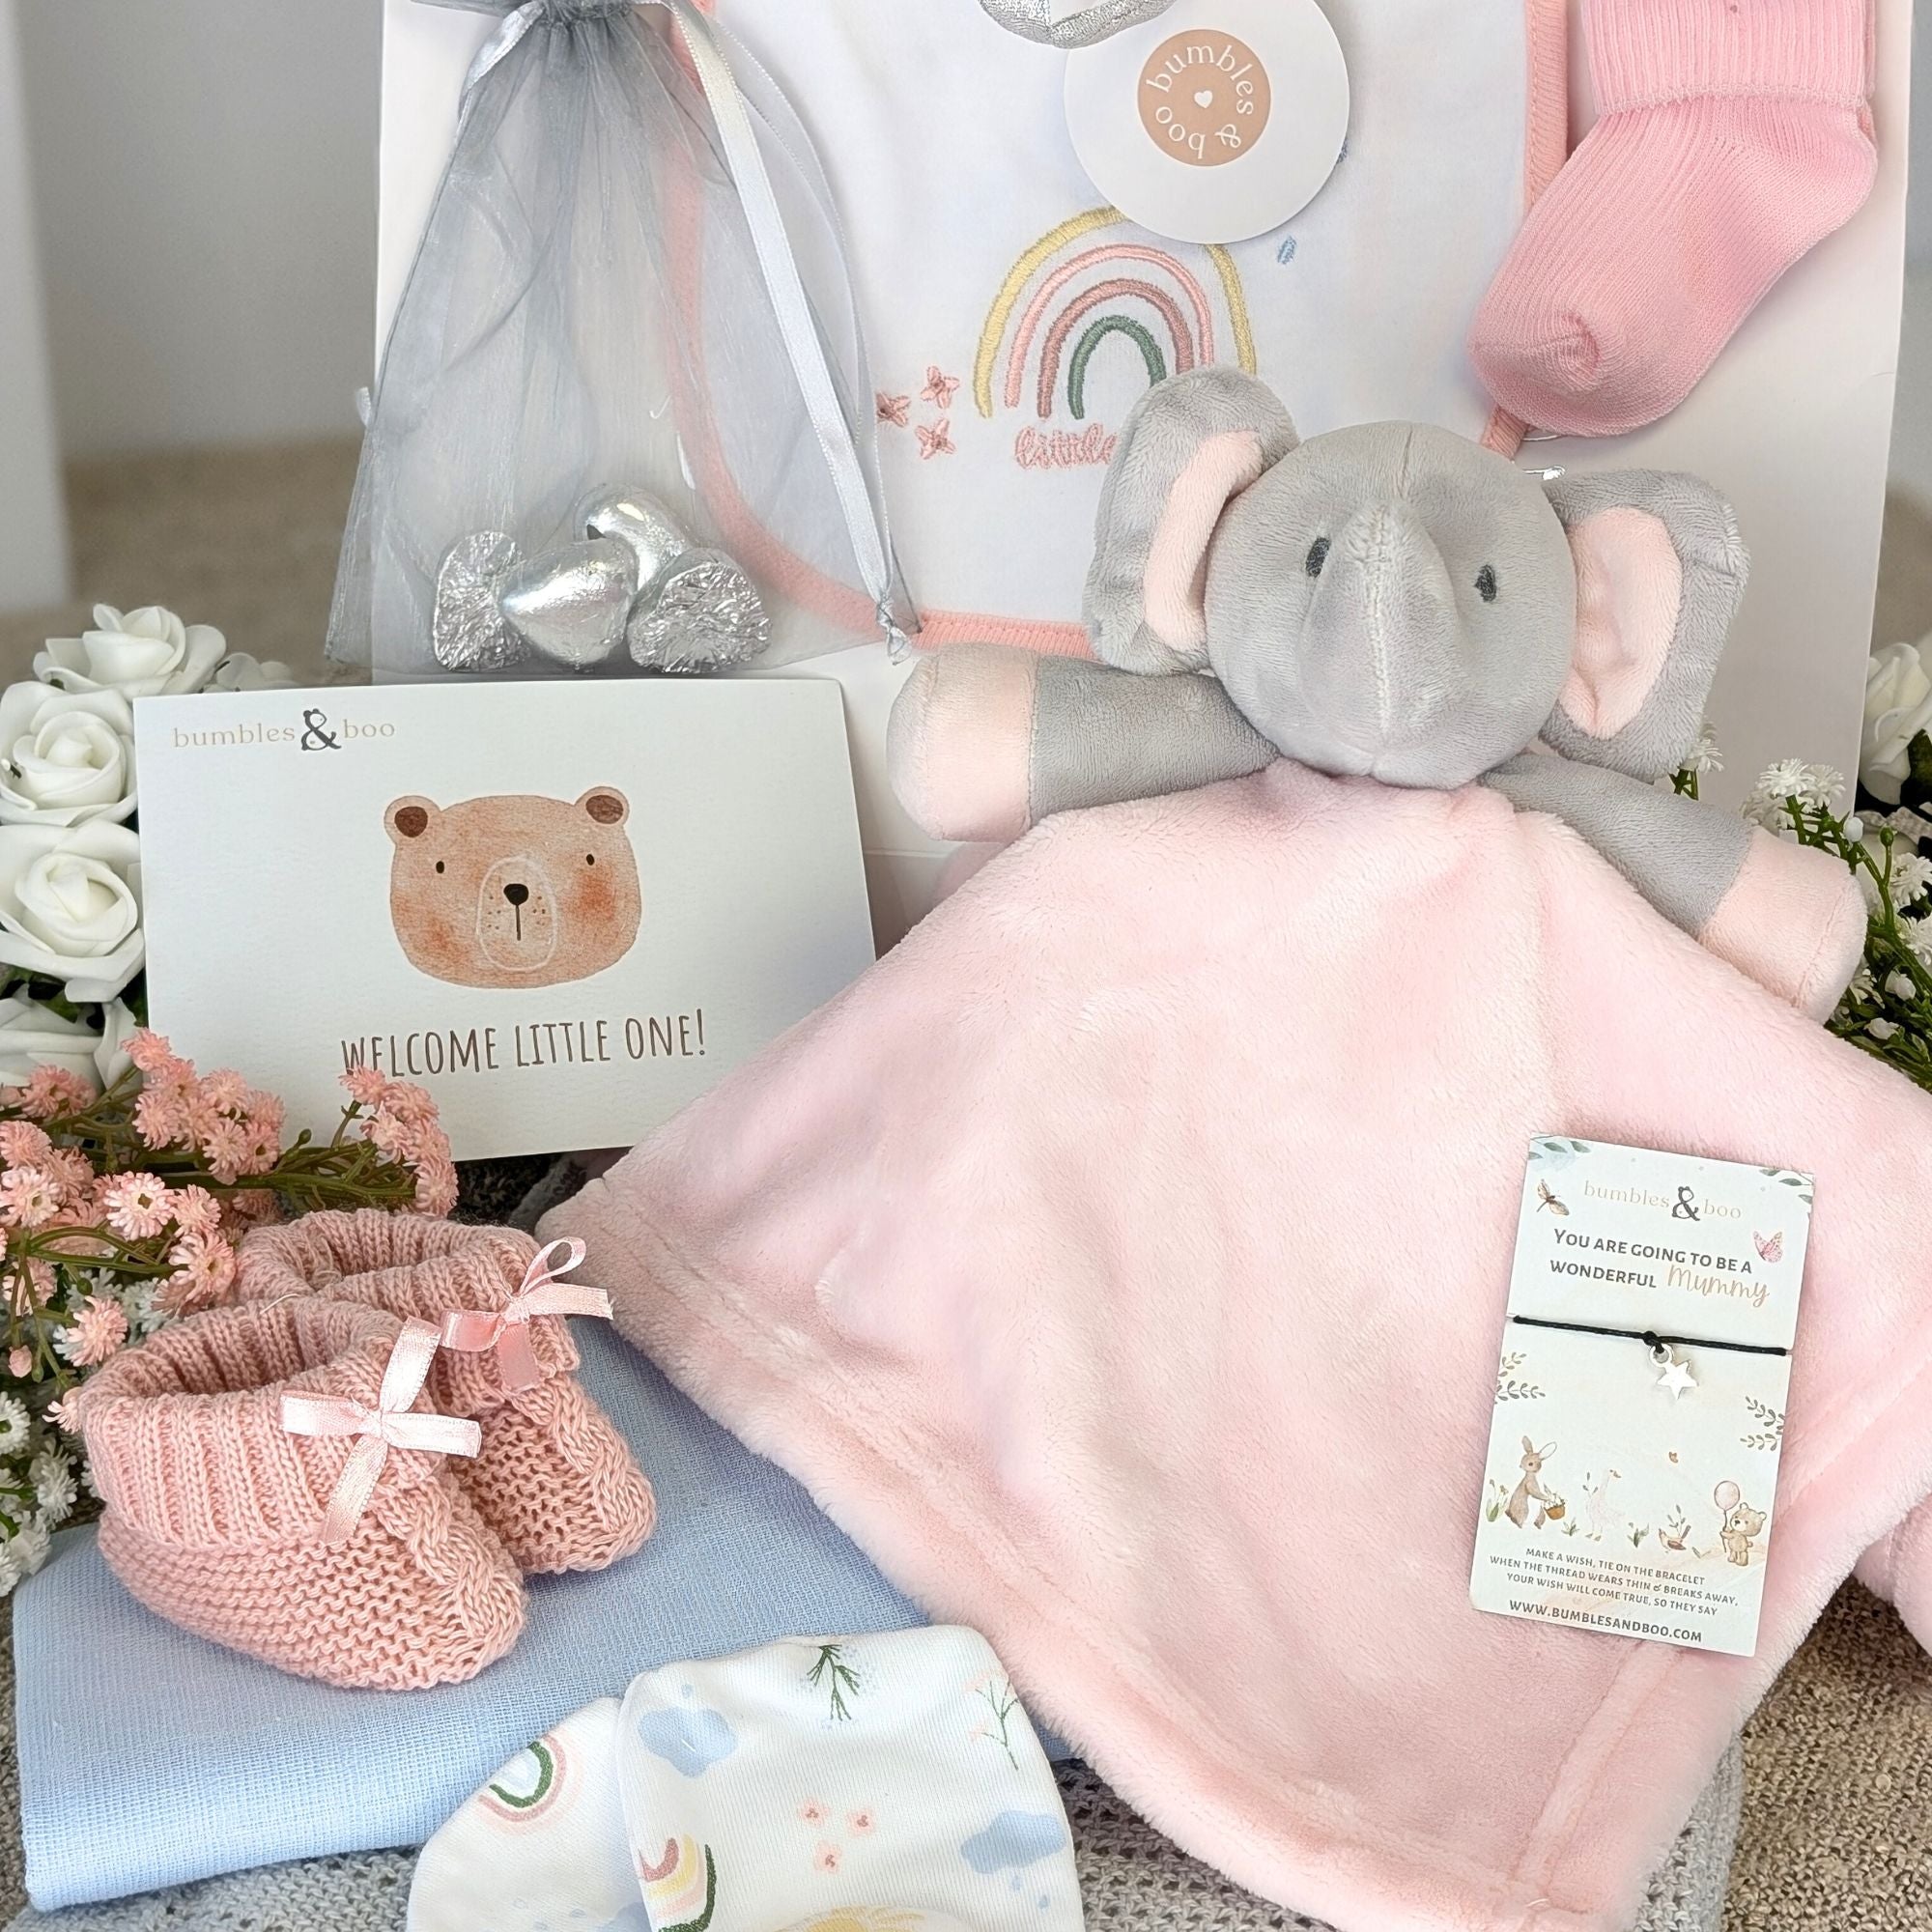 new mum hamper with elephant soft toy, baby socks, baby bib, muslin square, baby mittens, gifts for mum.